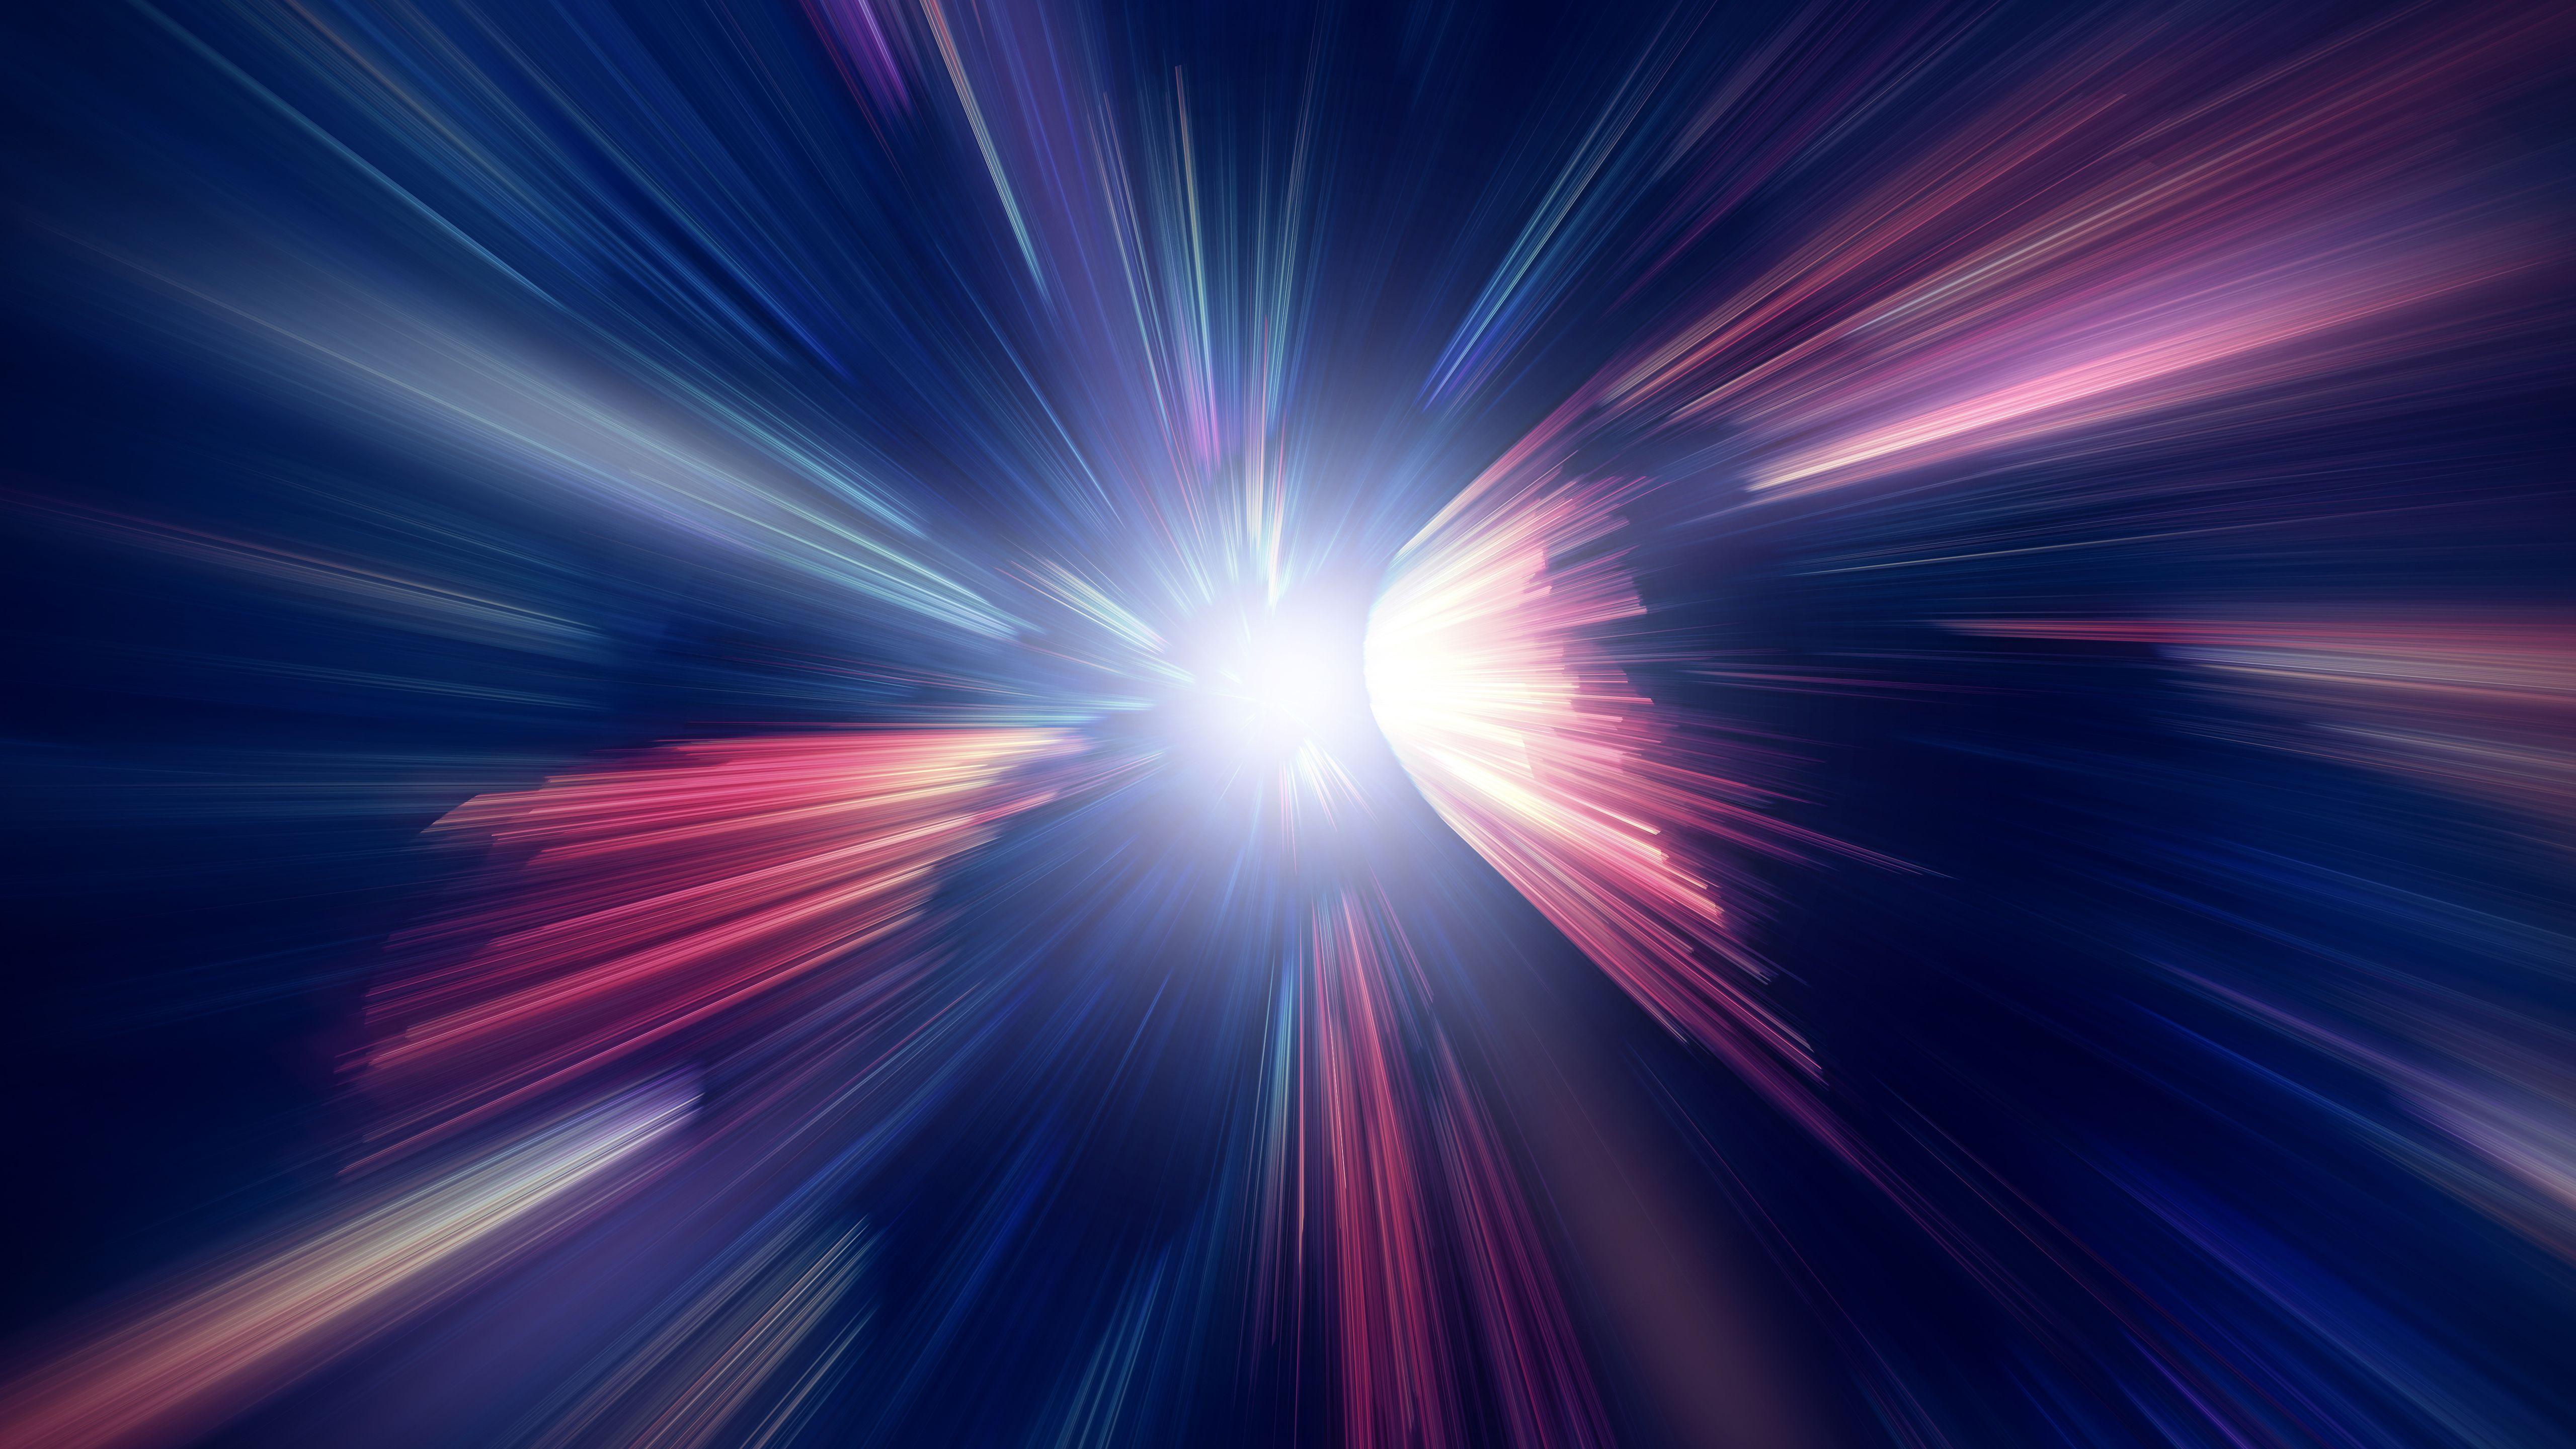 Light Speed Wallpaper 4K Space Warp Colored rays 6395